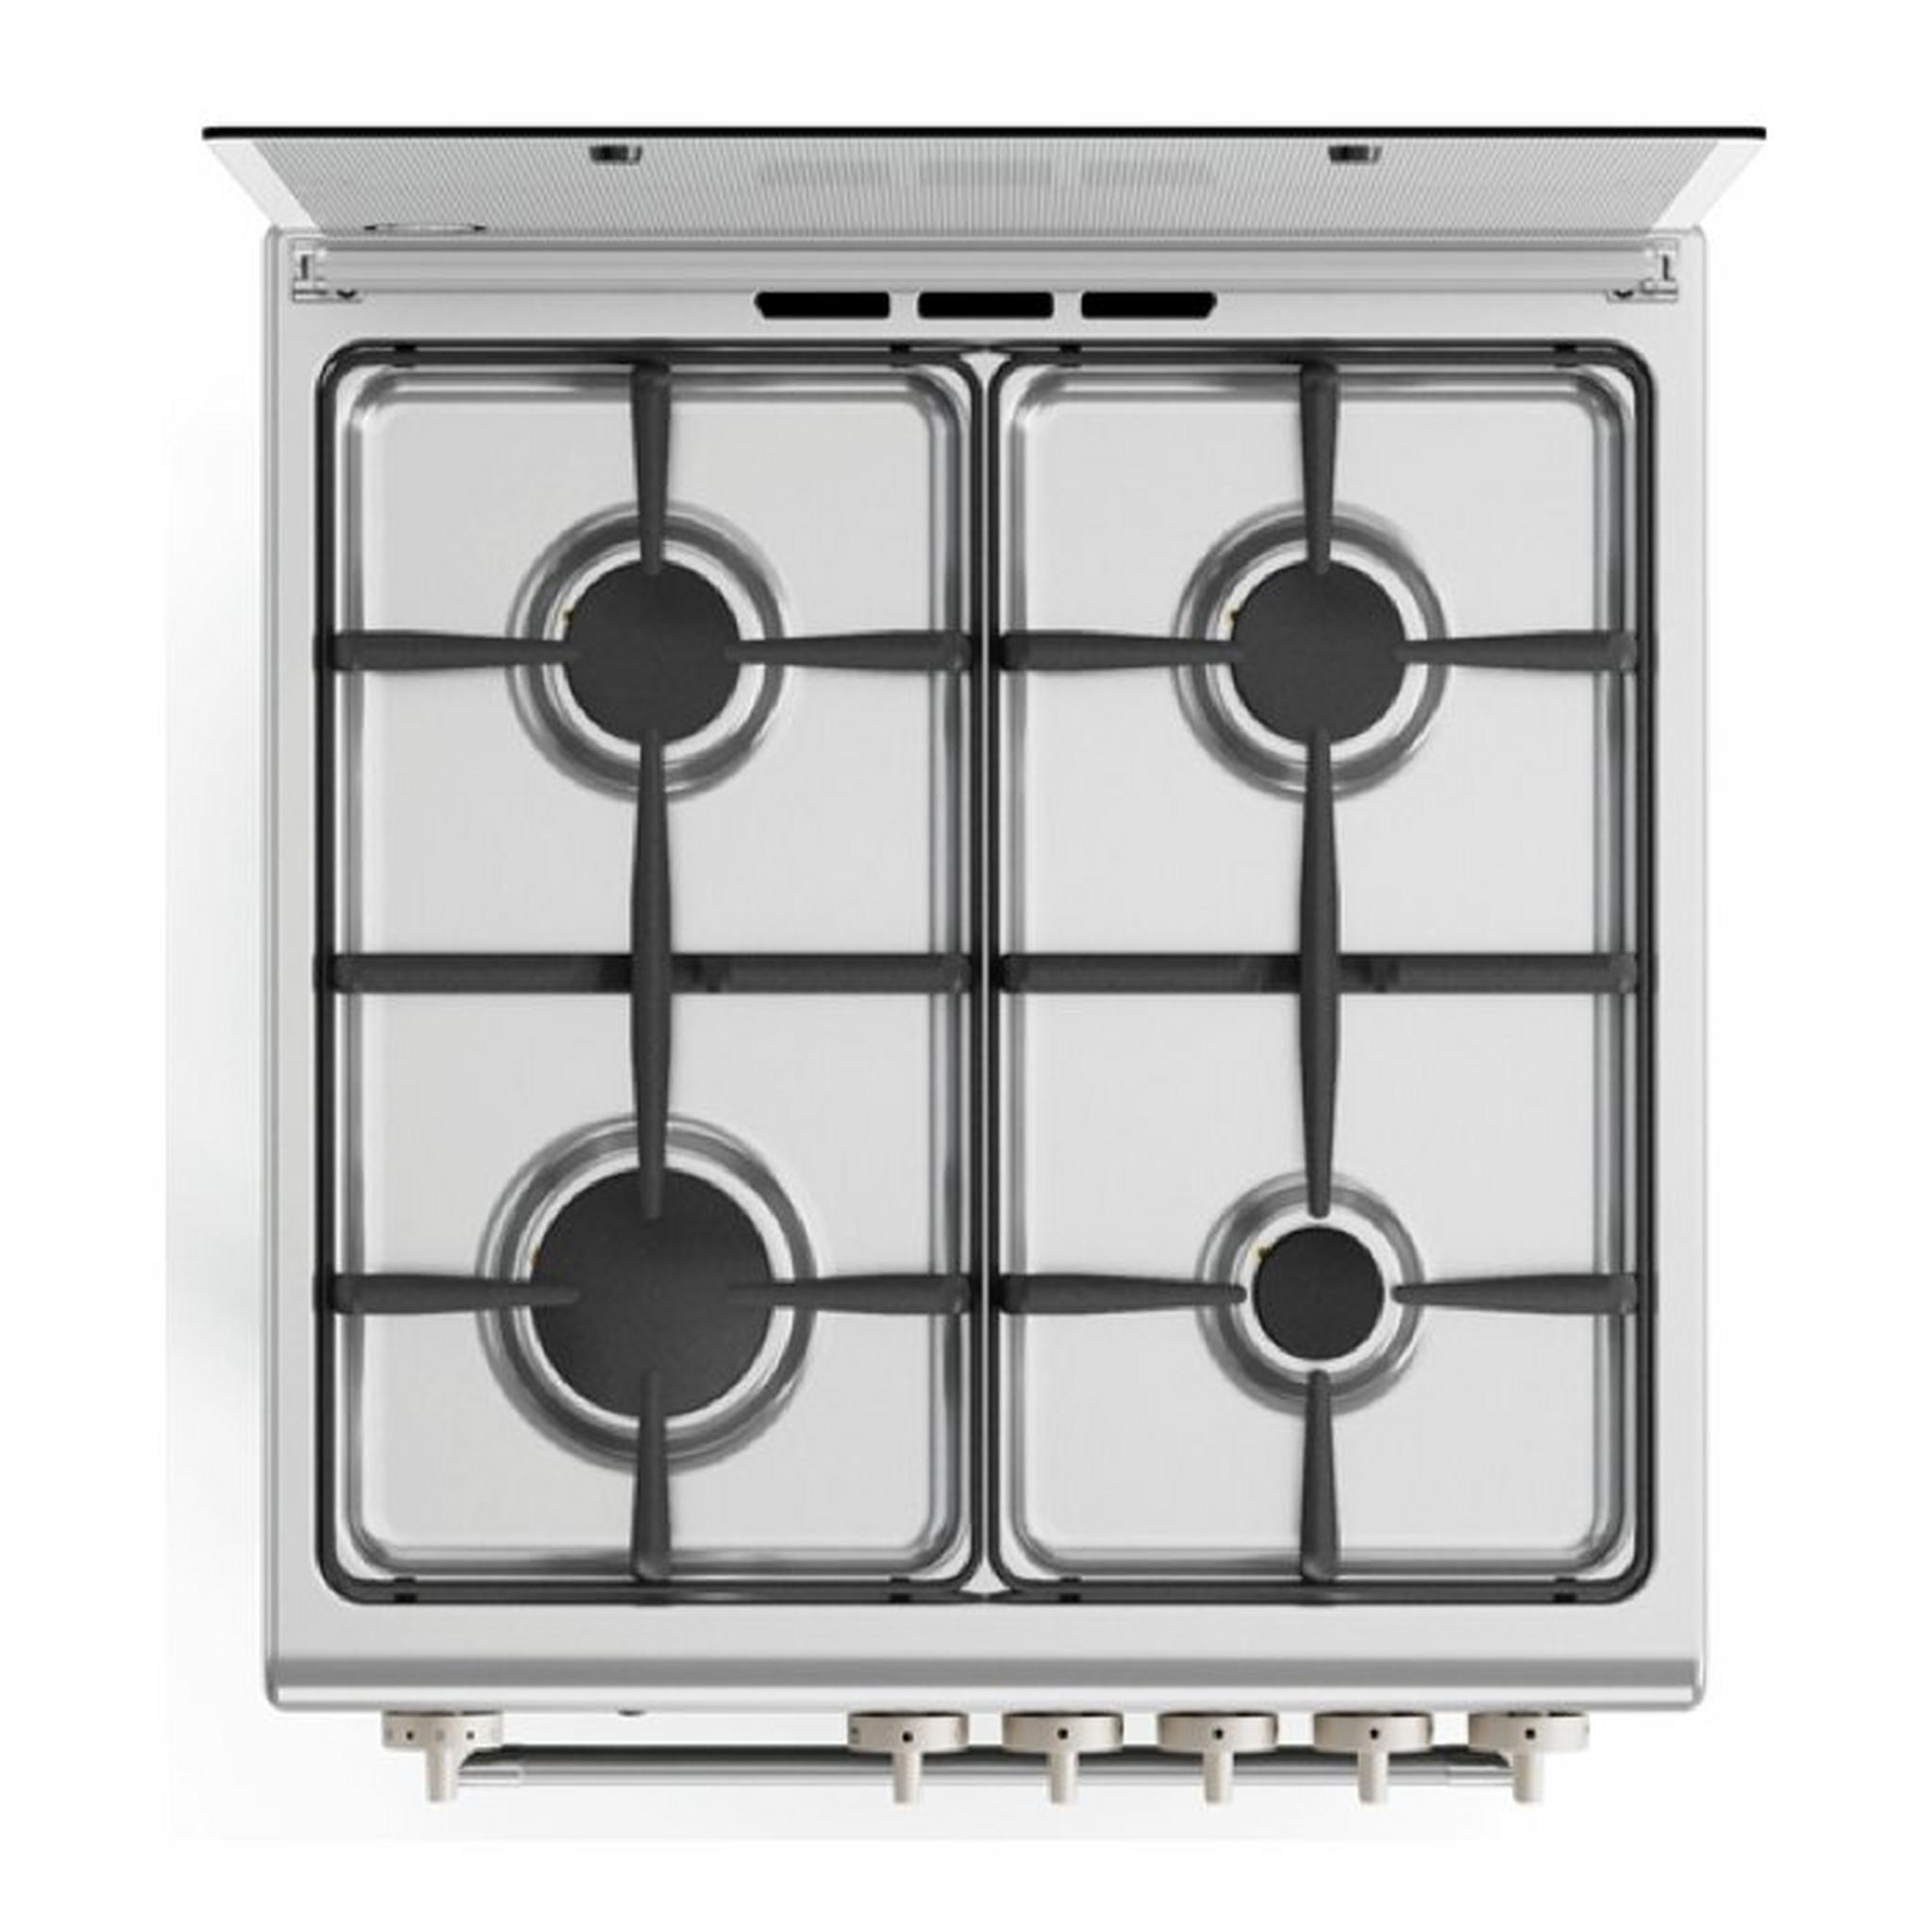 Lagermania 4 Burners Gas Cooker, 60X60cm, M64031EX0 - Stainless Steel